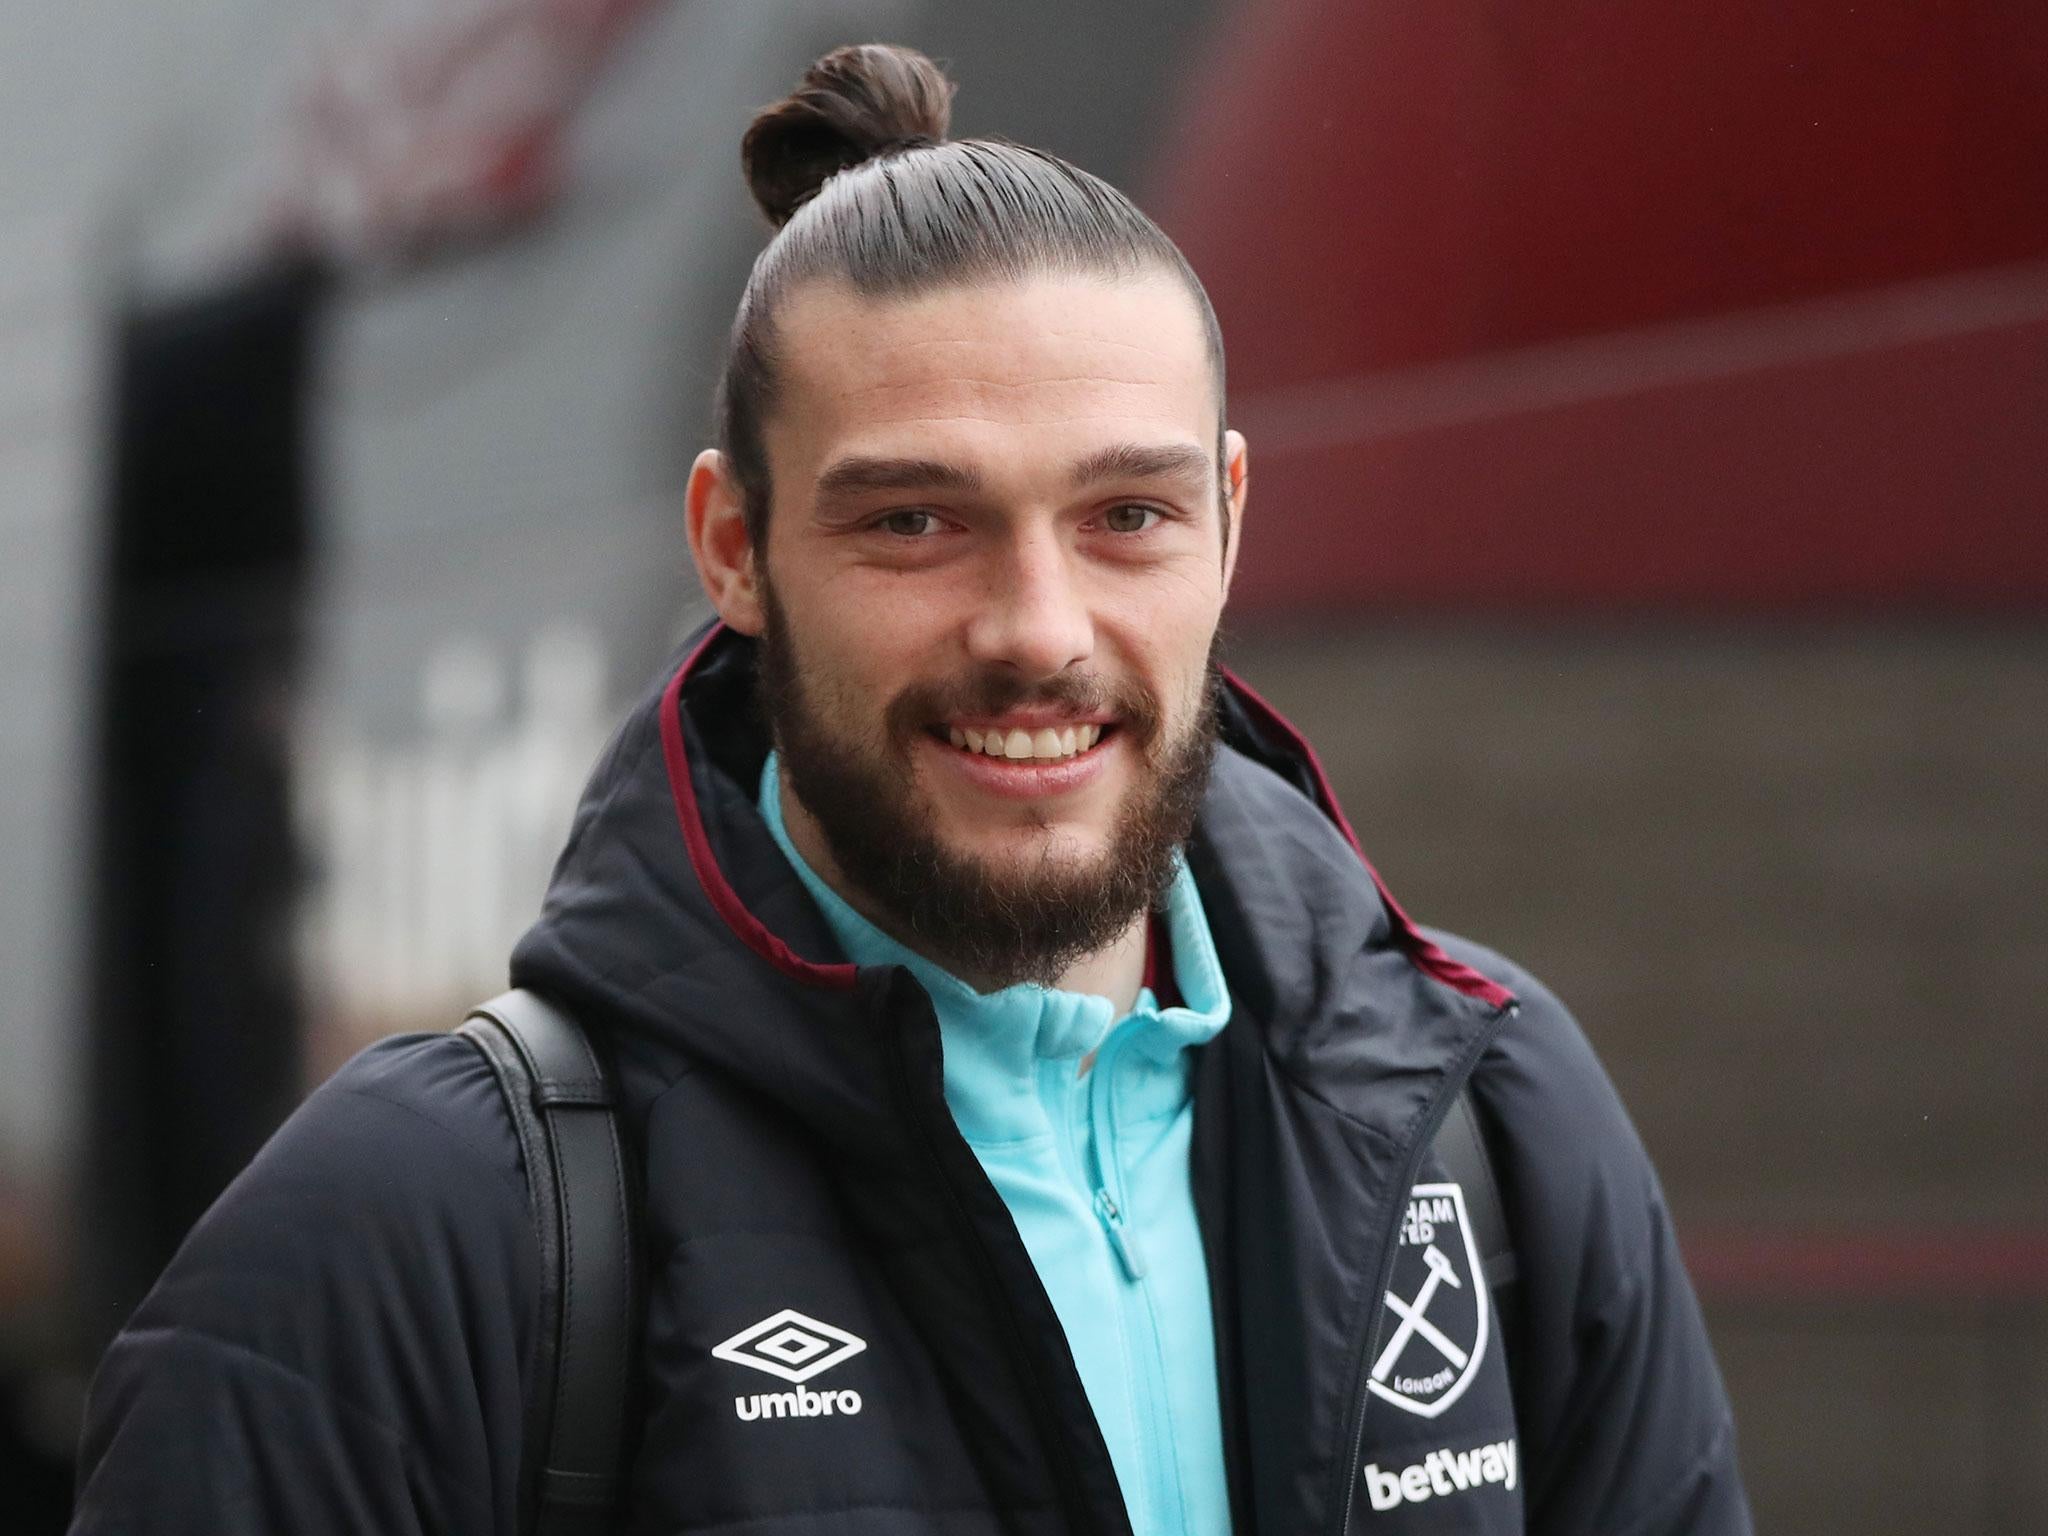 Andy Carroll regrets his drinking during the early stages of his career that may have caused his injury problems